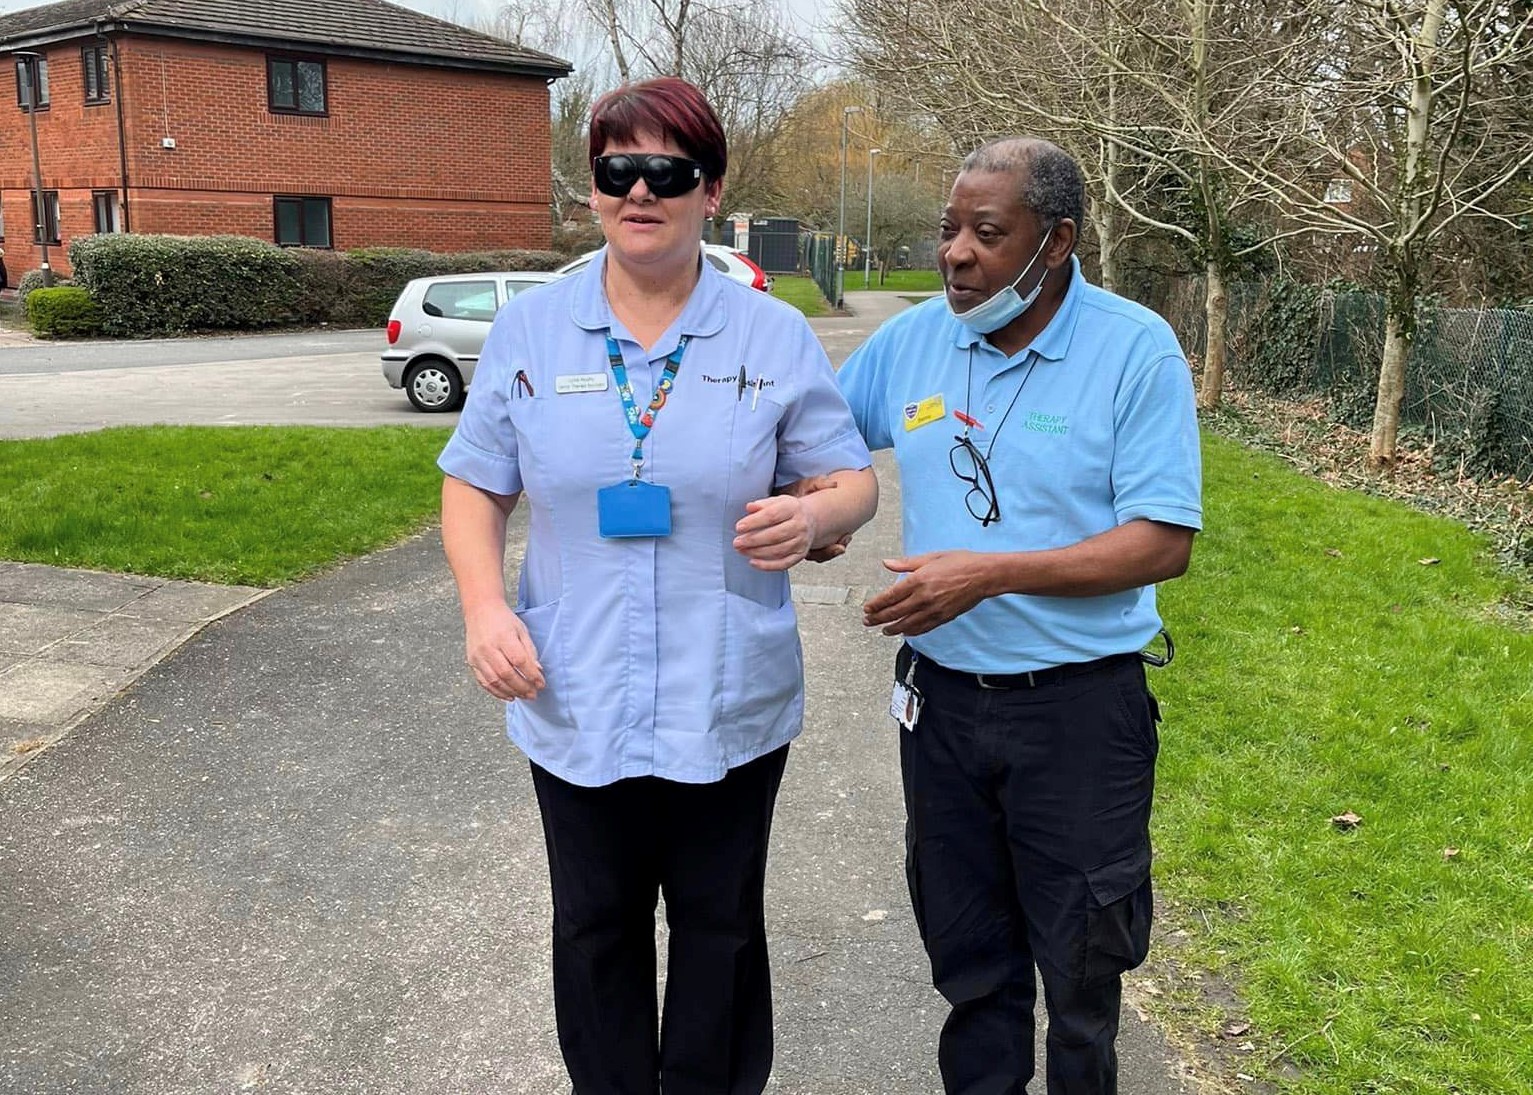 Image shows a male and female member of staff, taking part in the sighted guide training. The man is guiding the lady by the elbow. They are outside.